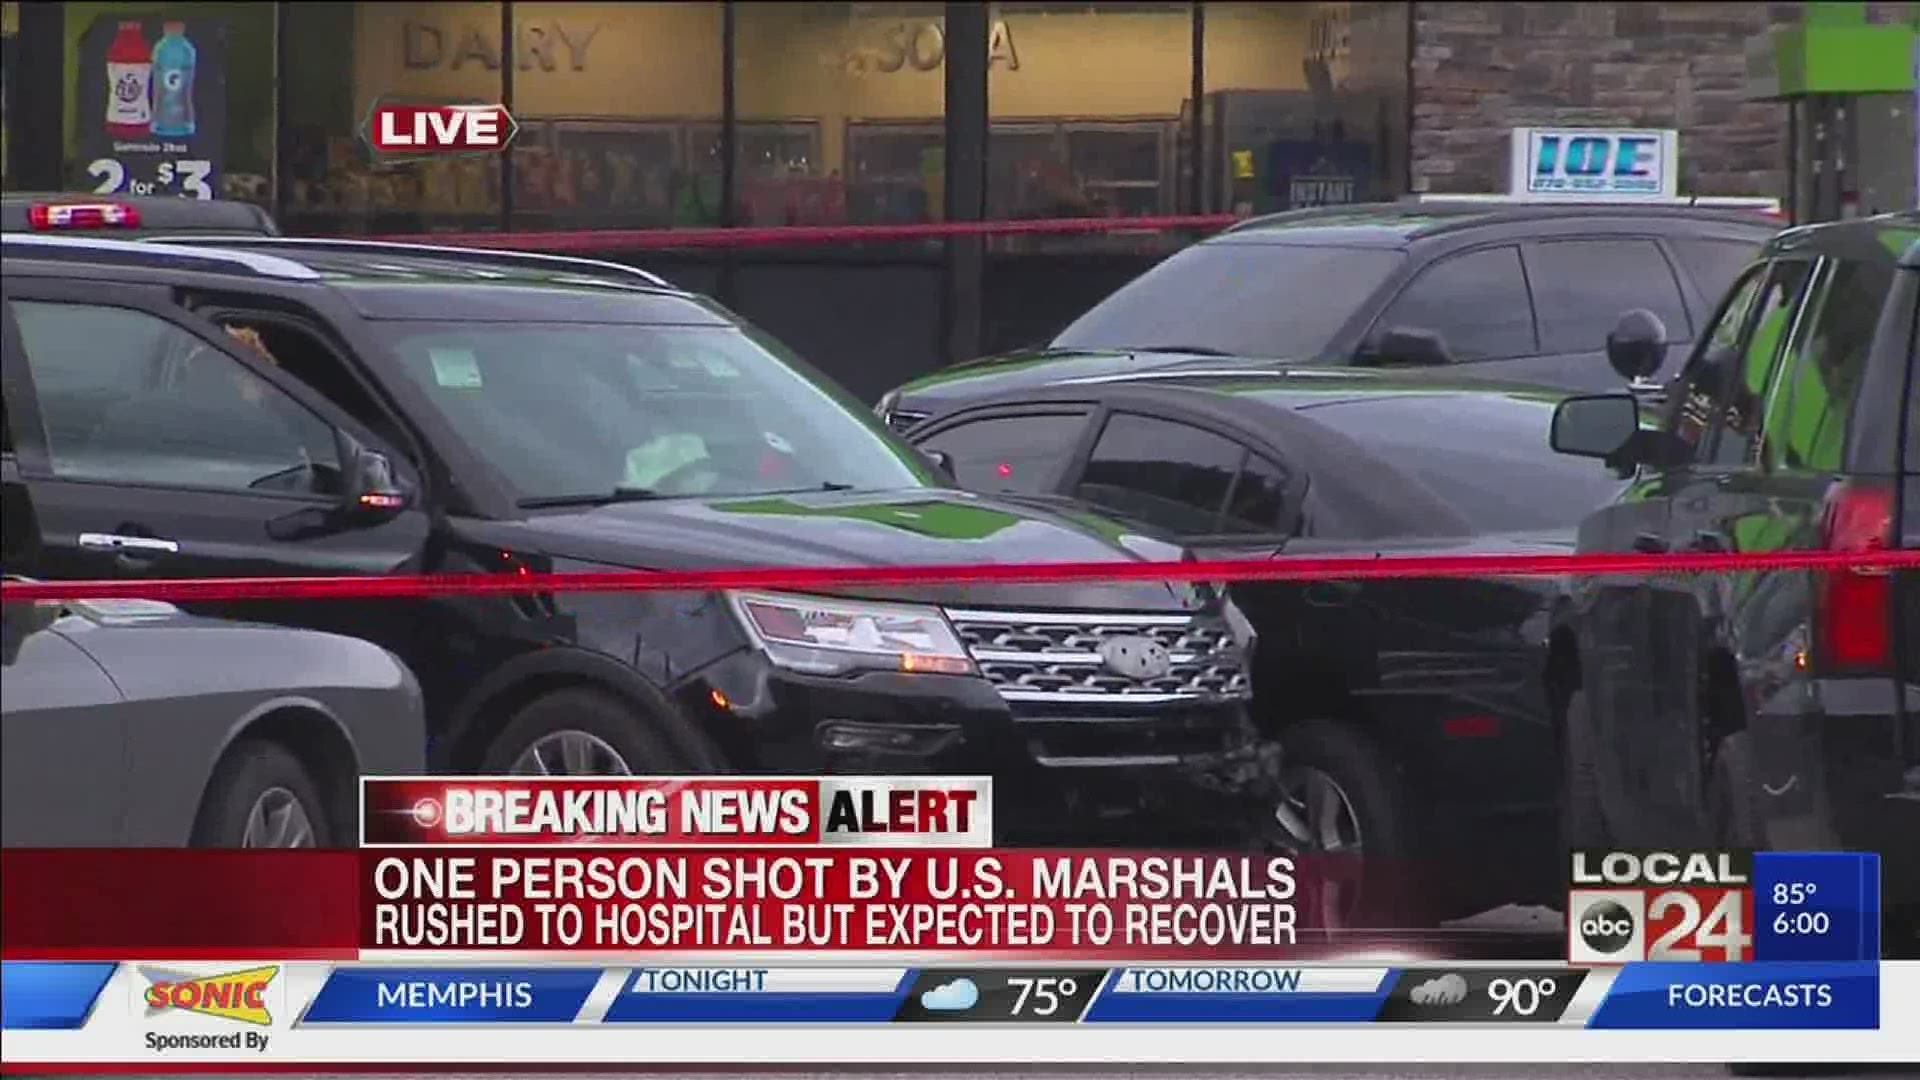 Tennessee Bureau of Investigation is on the scene with Memphis Police Department